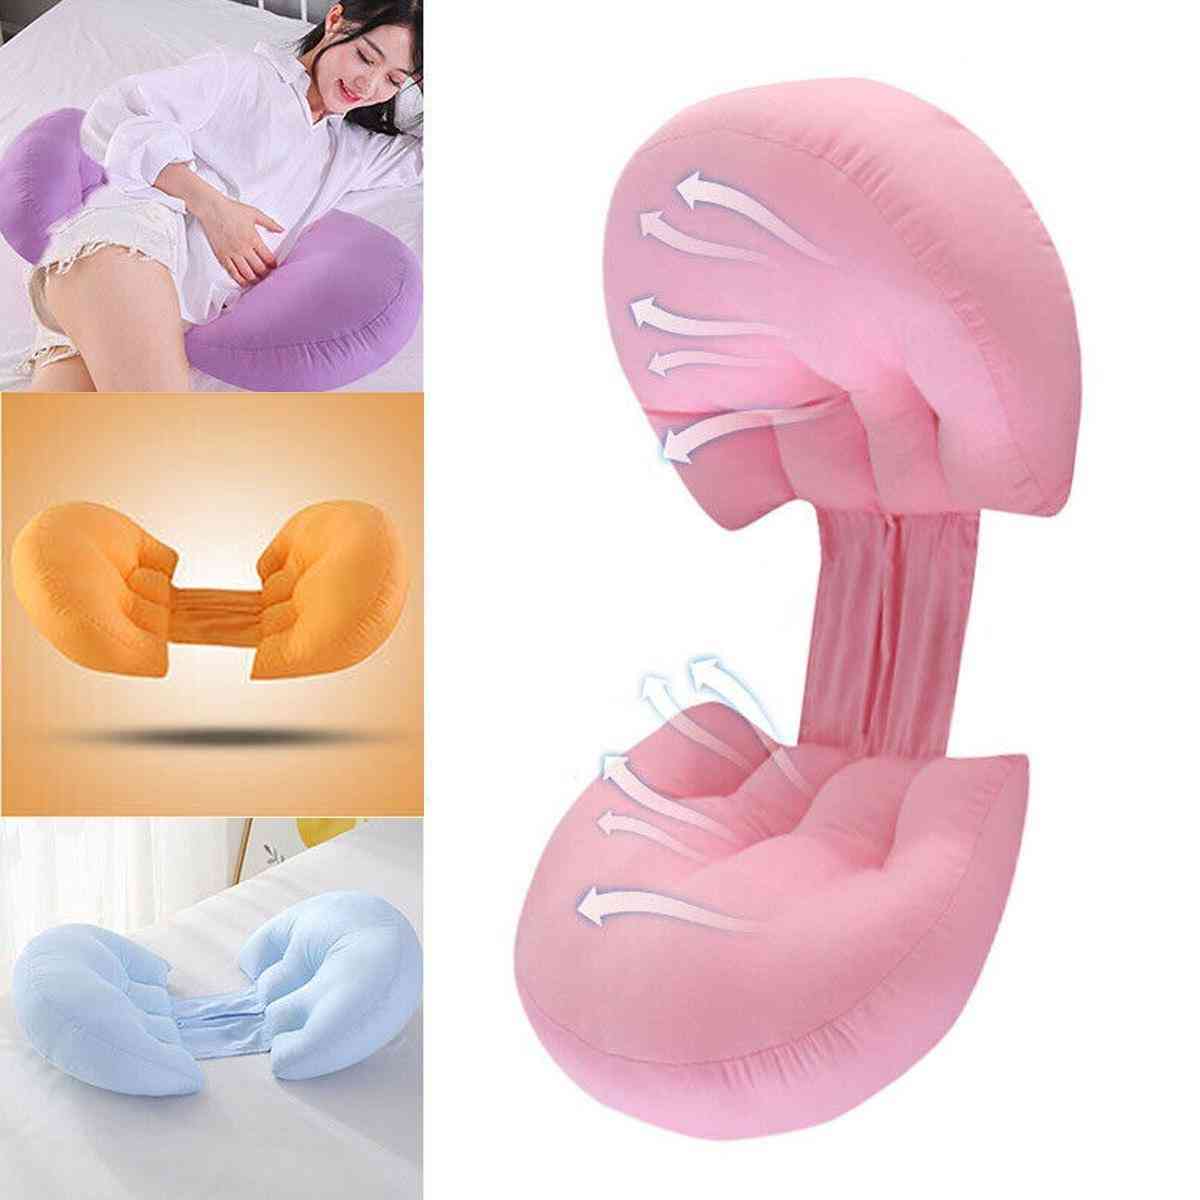 Women Pregnancy Pillow, Belly Support Side Sleepers Nursing Maternity